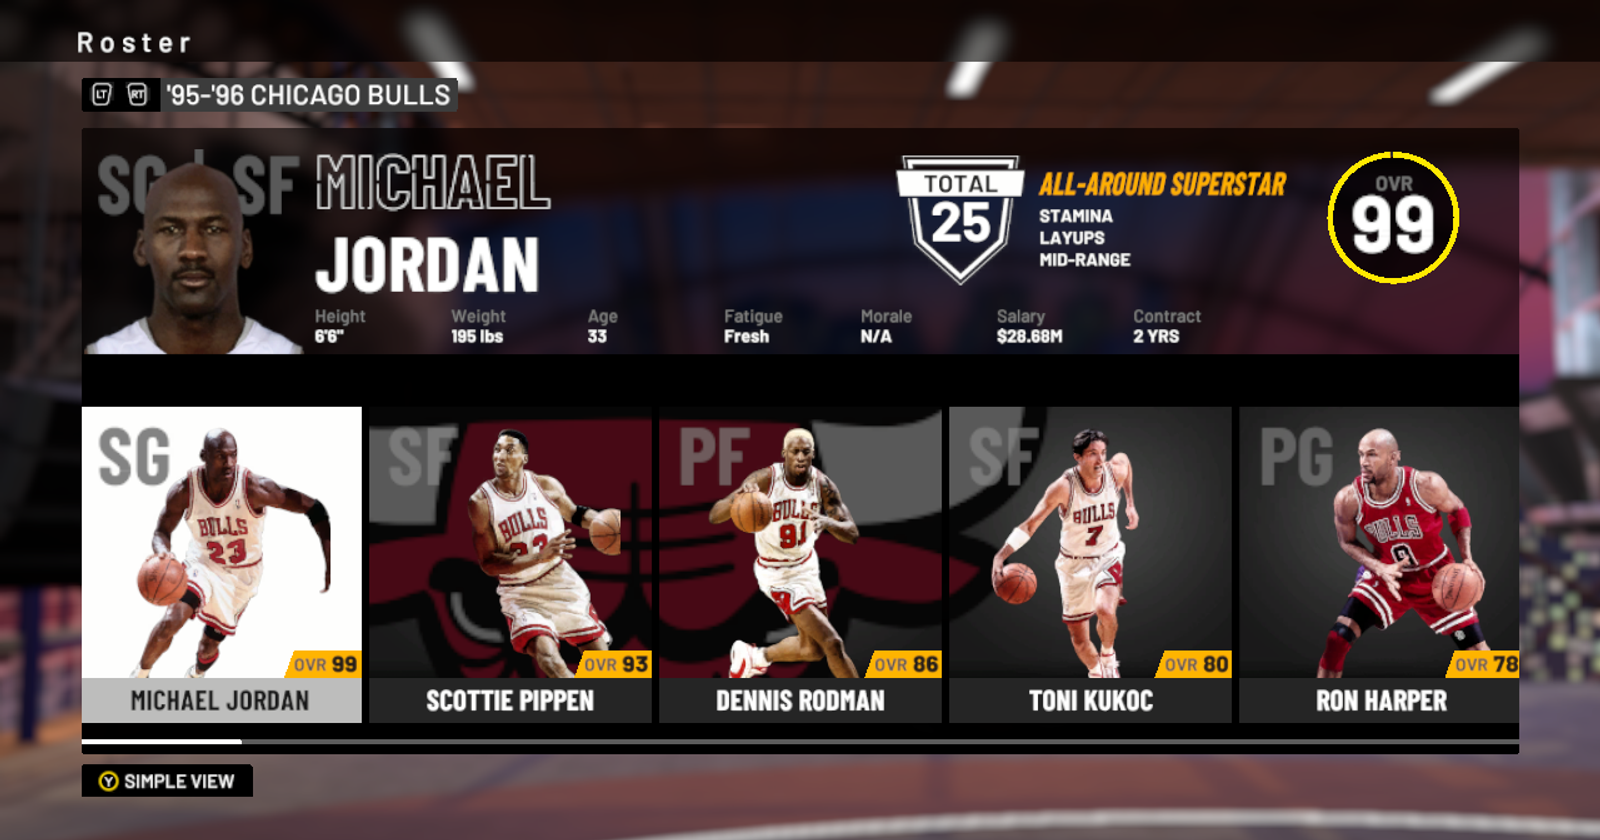 NBA 2K19: 1995-1996 Chicago Bulls Player Ratings and Roster